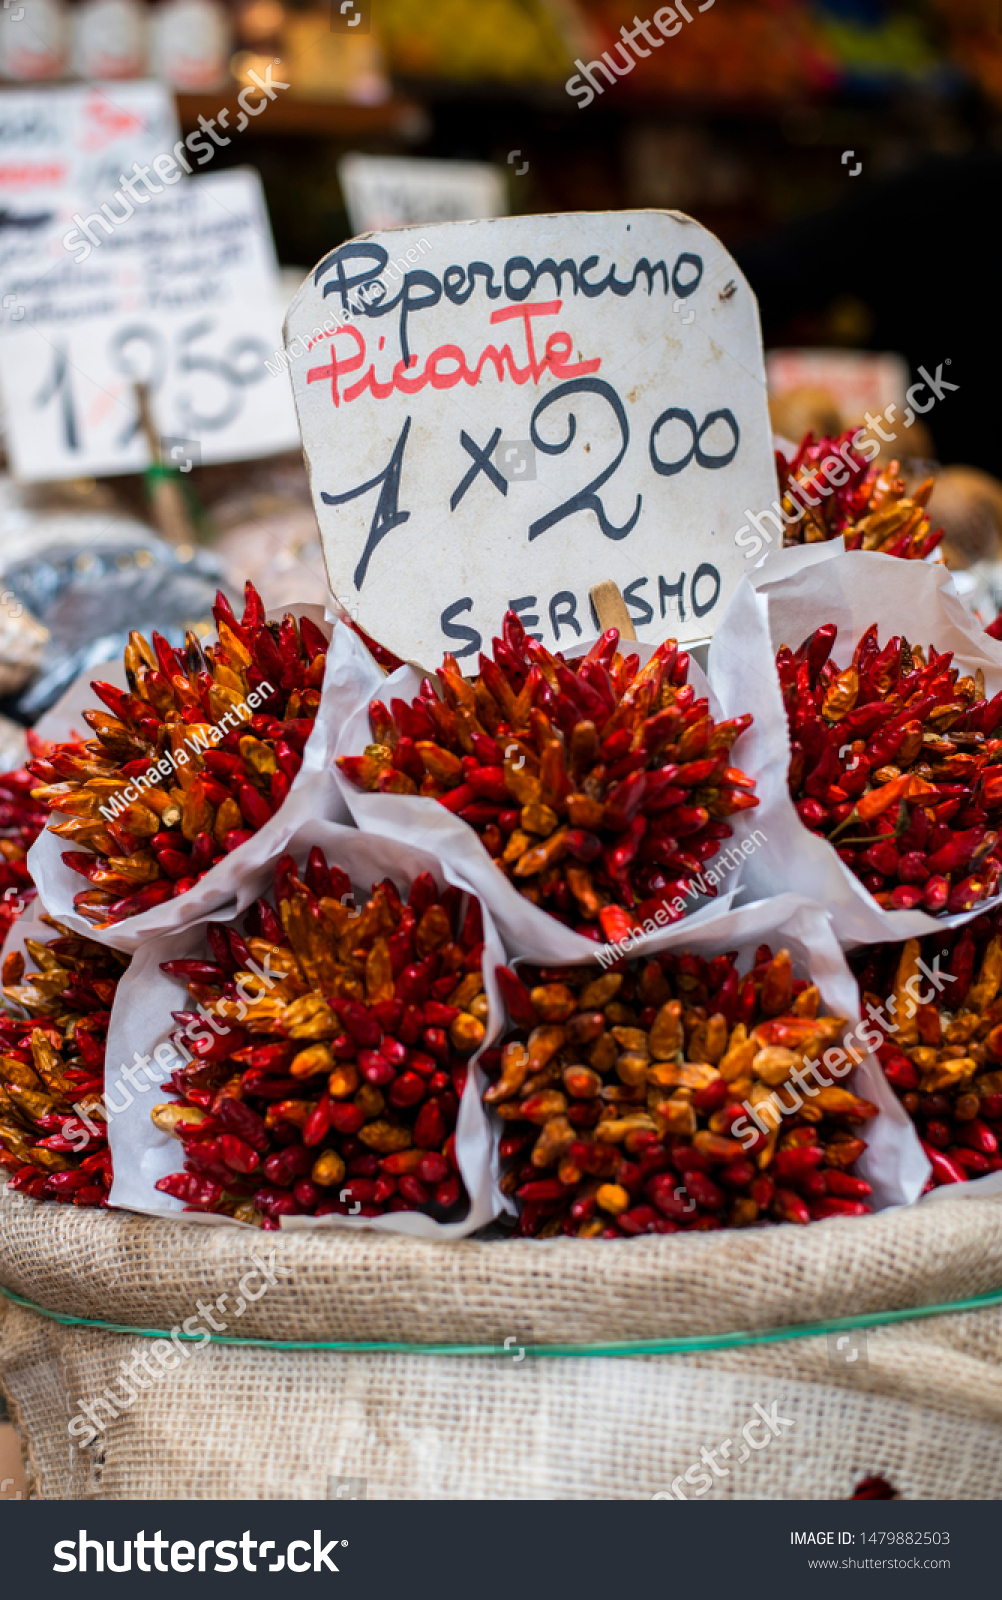 bunches of dried red hot chili peppers at an italian marketplace, peperoncino picante bouquet, dark red dried peppers #1479882503